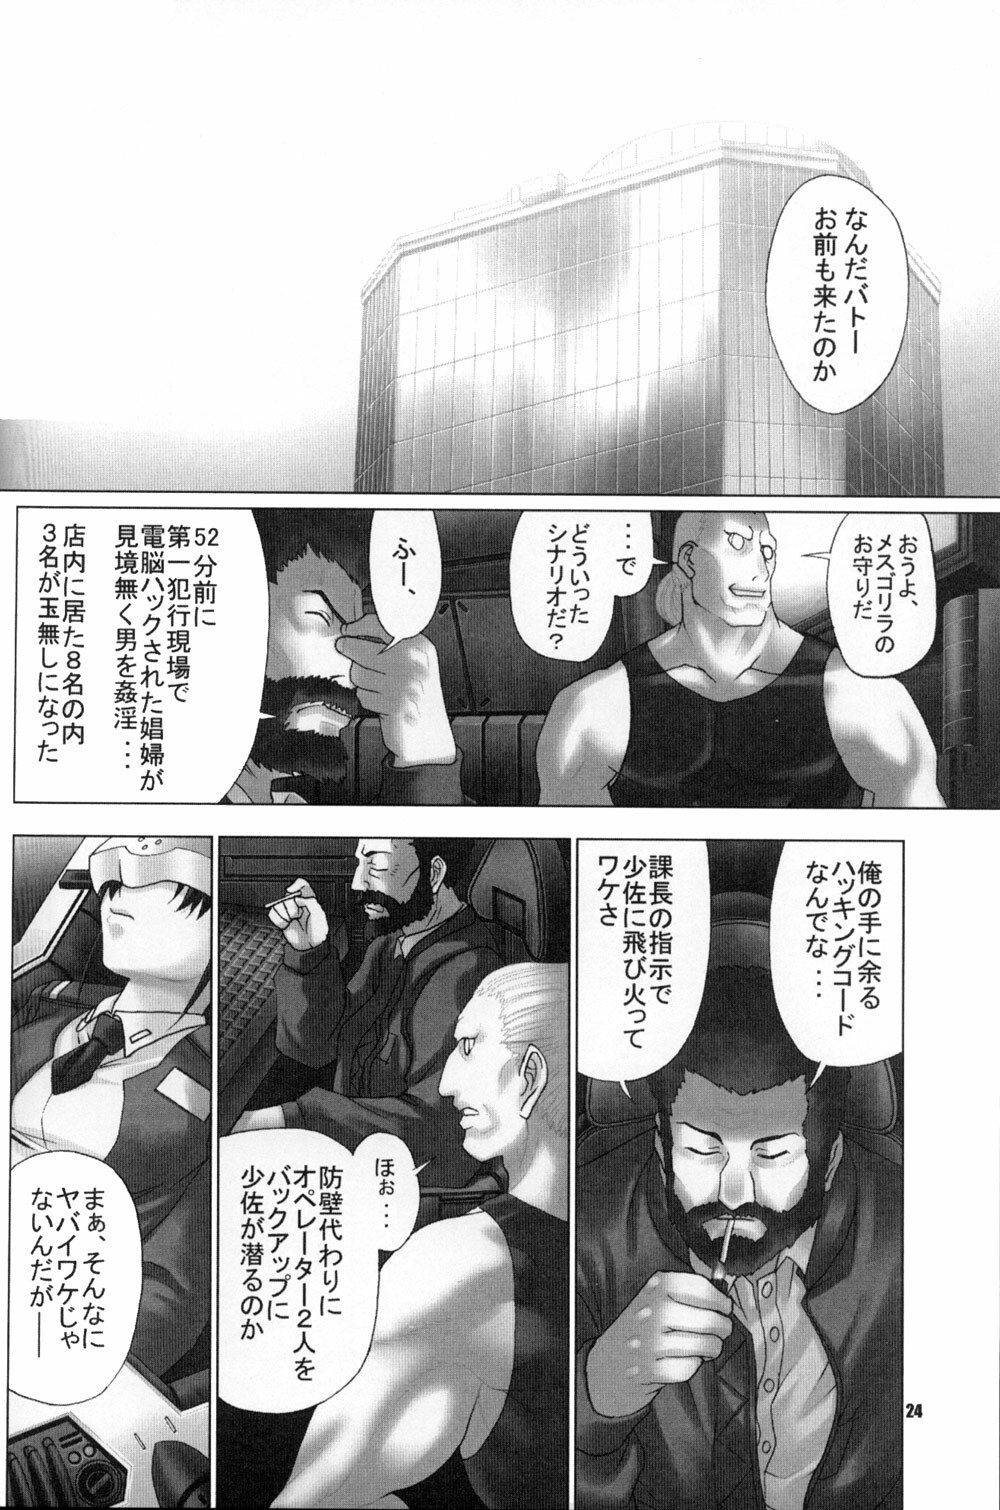 (C66) [Runners High (Chiba Toshirou)] CELLULOID - ACME (Ghost in the Shell) page 24 full